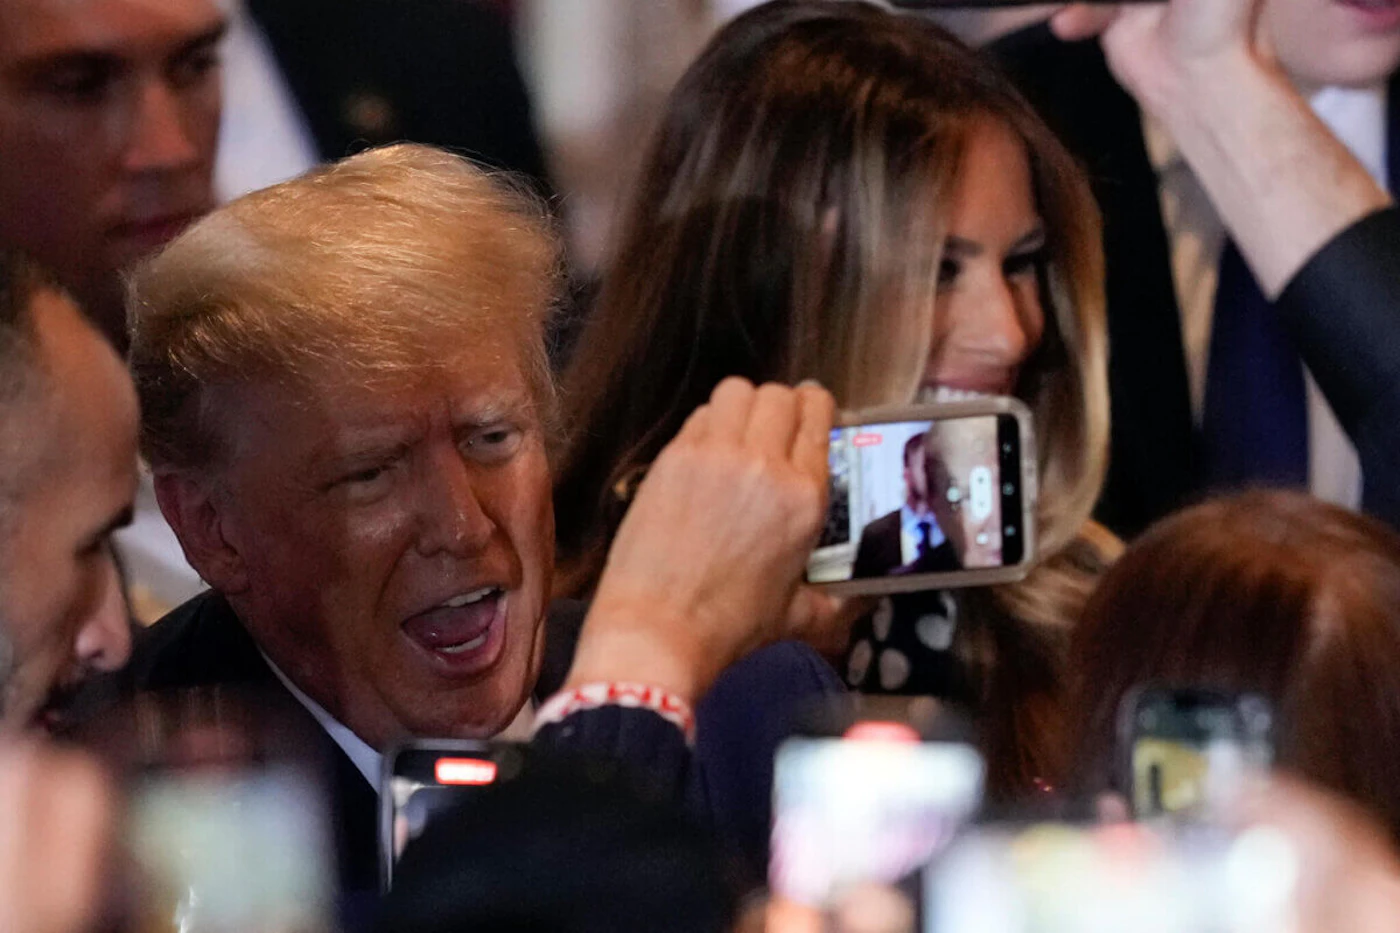 Former President Donald Trump greets supporters after announcing a third run for president at Mar-a-Lago in Palm Beach, Fla., Tuesday, Nov. 15, 2022. Former first lady Melania Trump is at right. (AP Photo/Rebecca Blackwell)